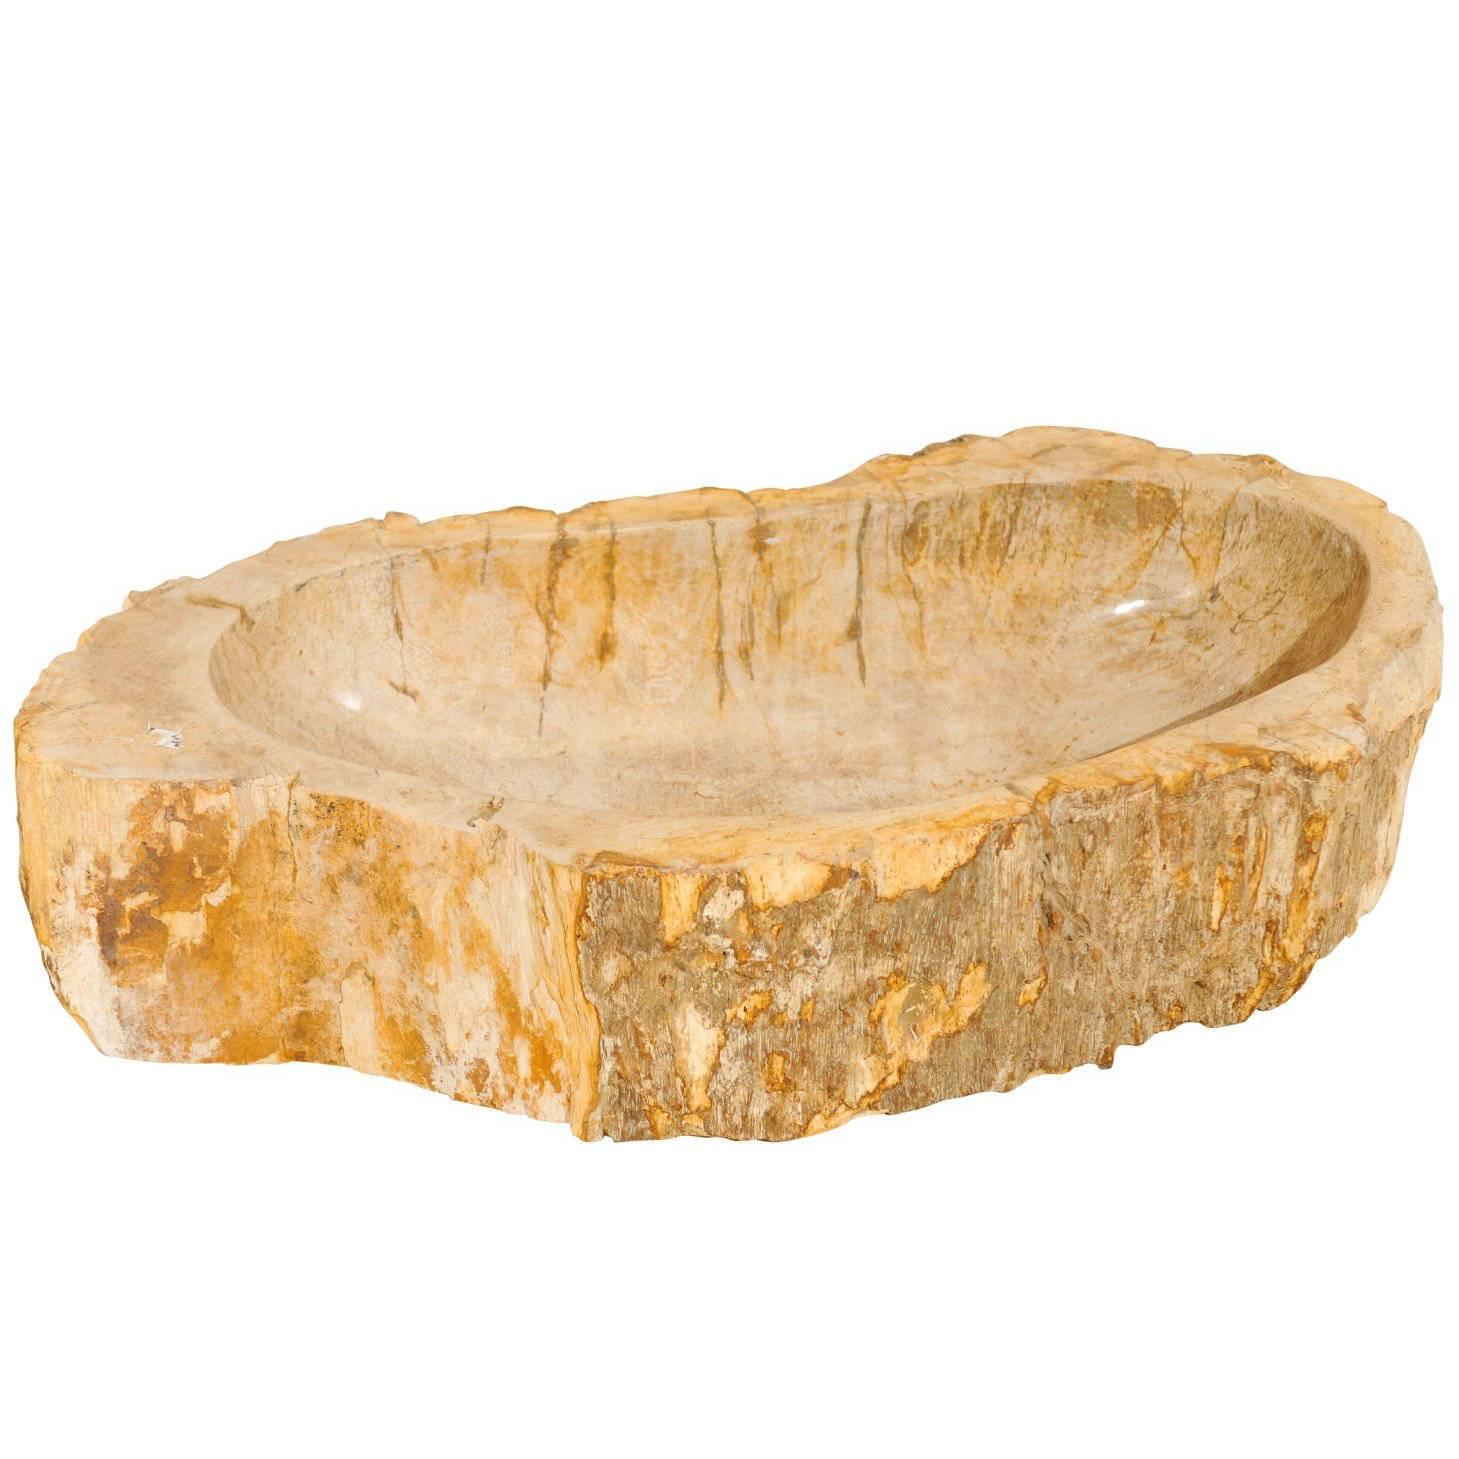 Polished Petrified Wood Sink with Rustic Oblong Shape in Warm Cream & Beige